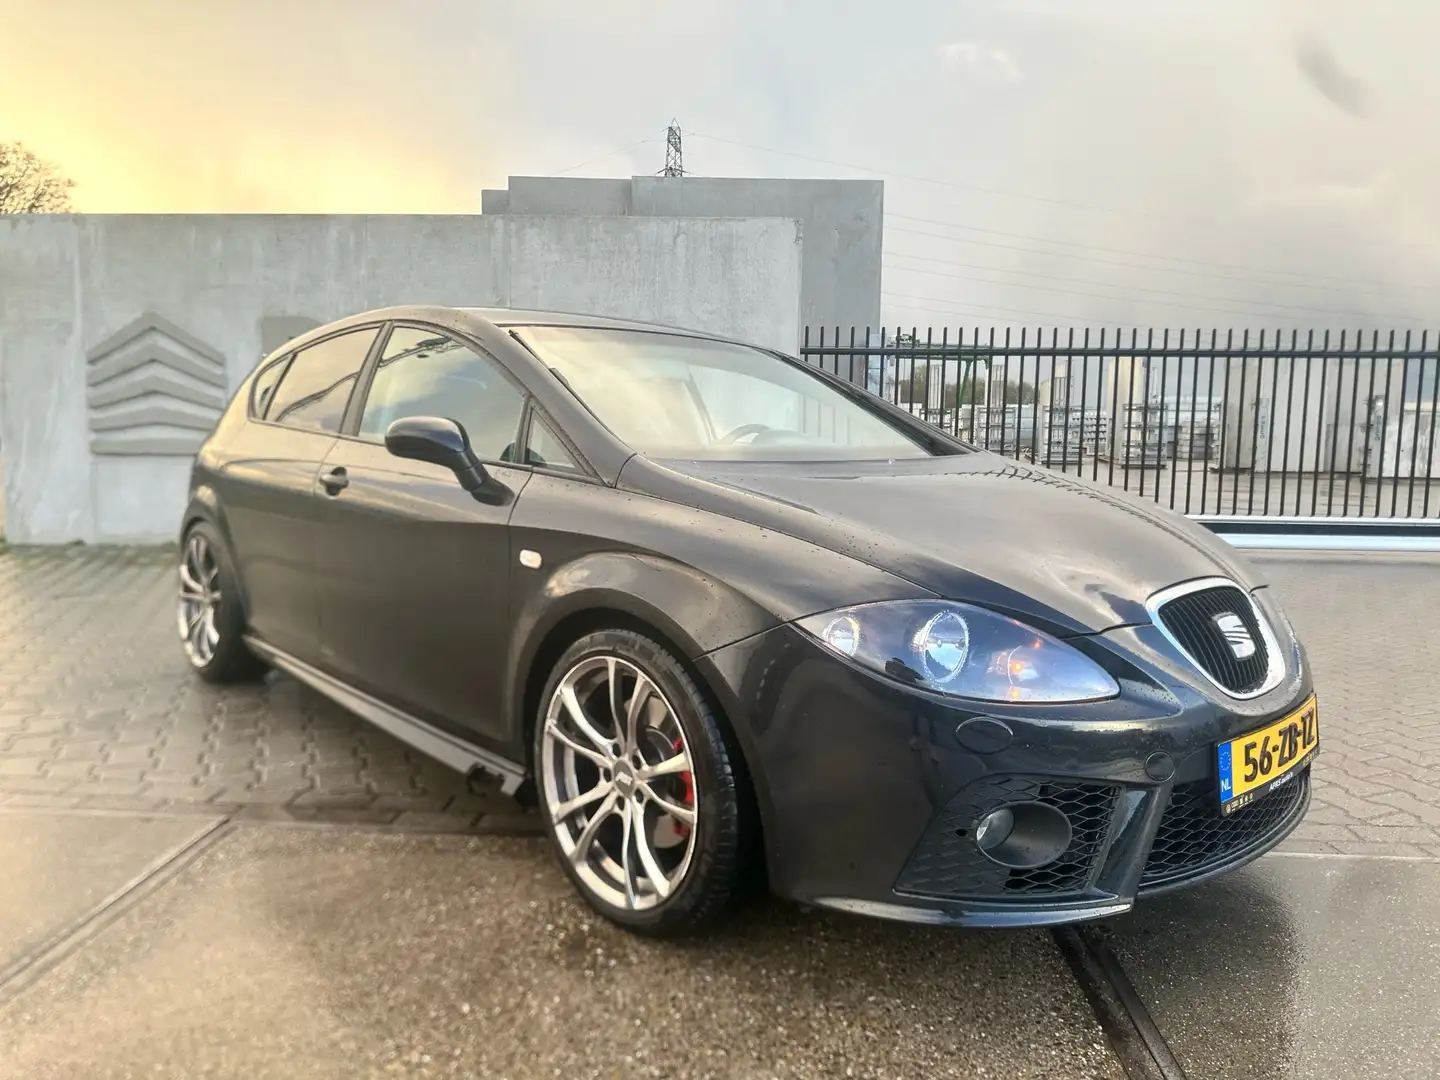 SEAT Leon 2.0 TFSI FR stage1, pops &bangs, ABT, H&R, Kanon crna - 2